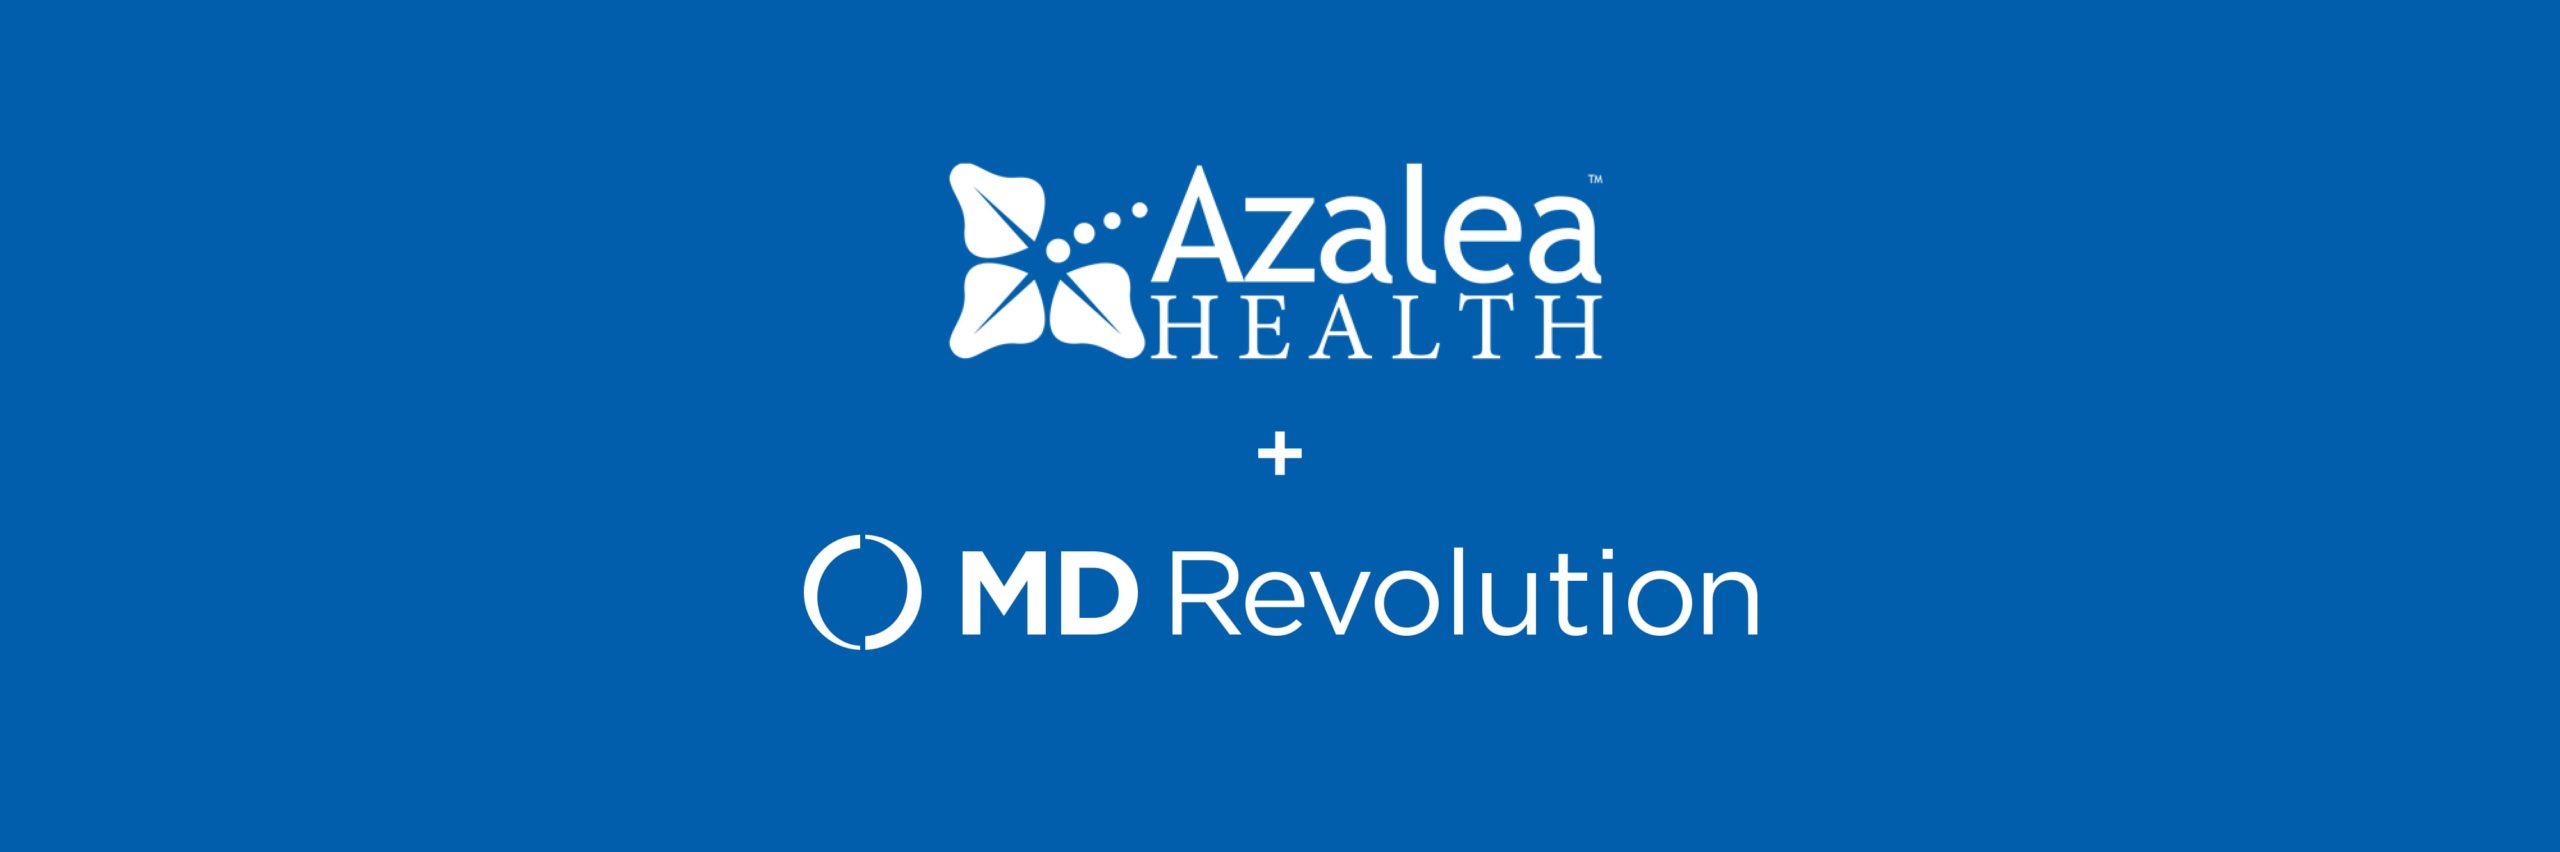 Azalea Health Partners with MD Revolution to Empower Healthcare ...